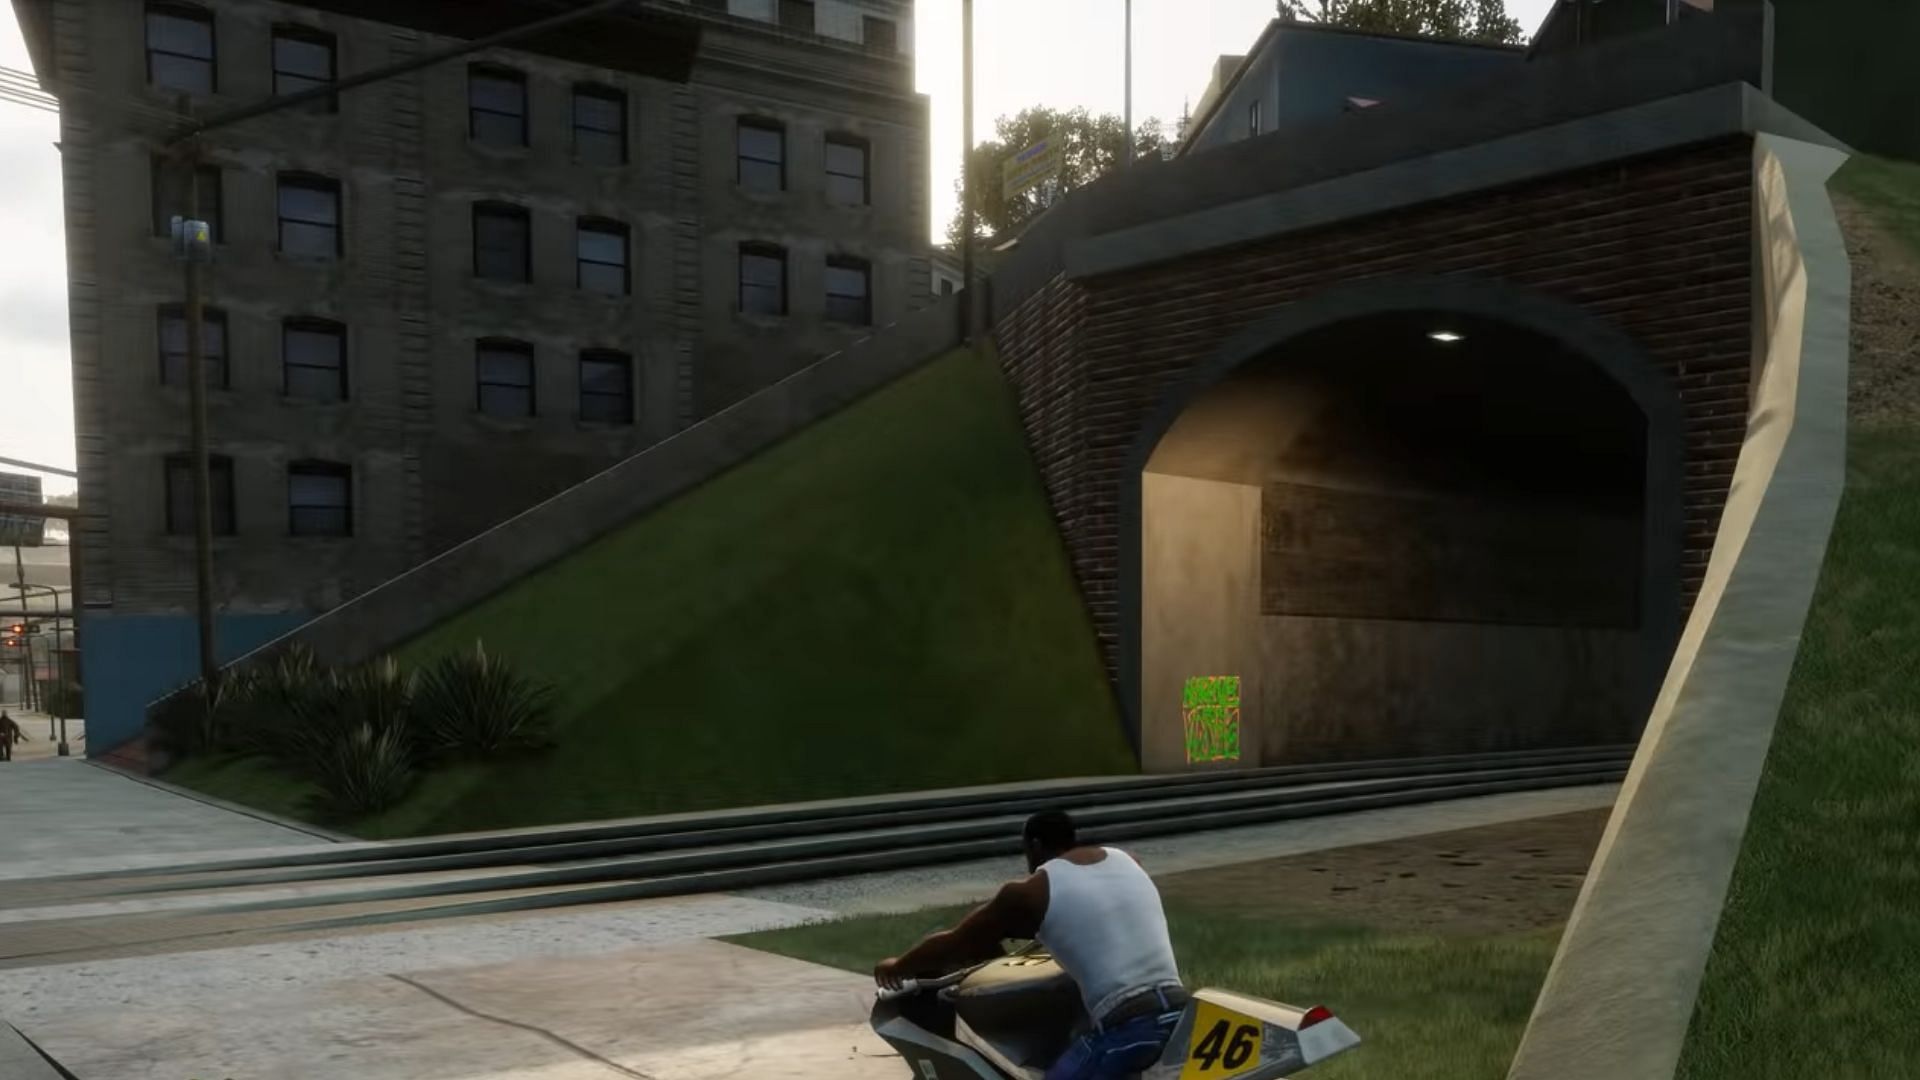 Players can get above the tunnel through these roads on the right (Image via GTA Series Videos, YouTube)